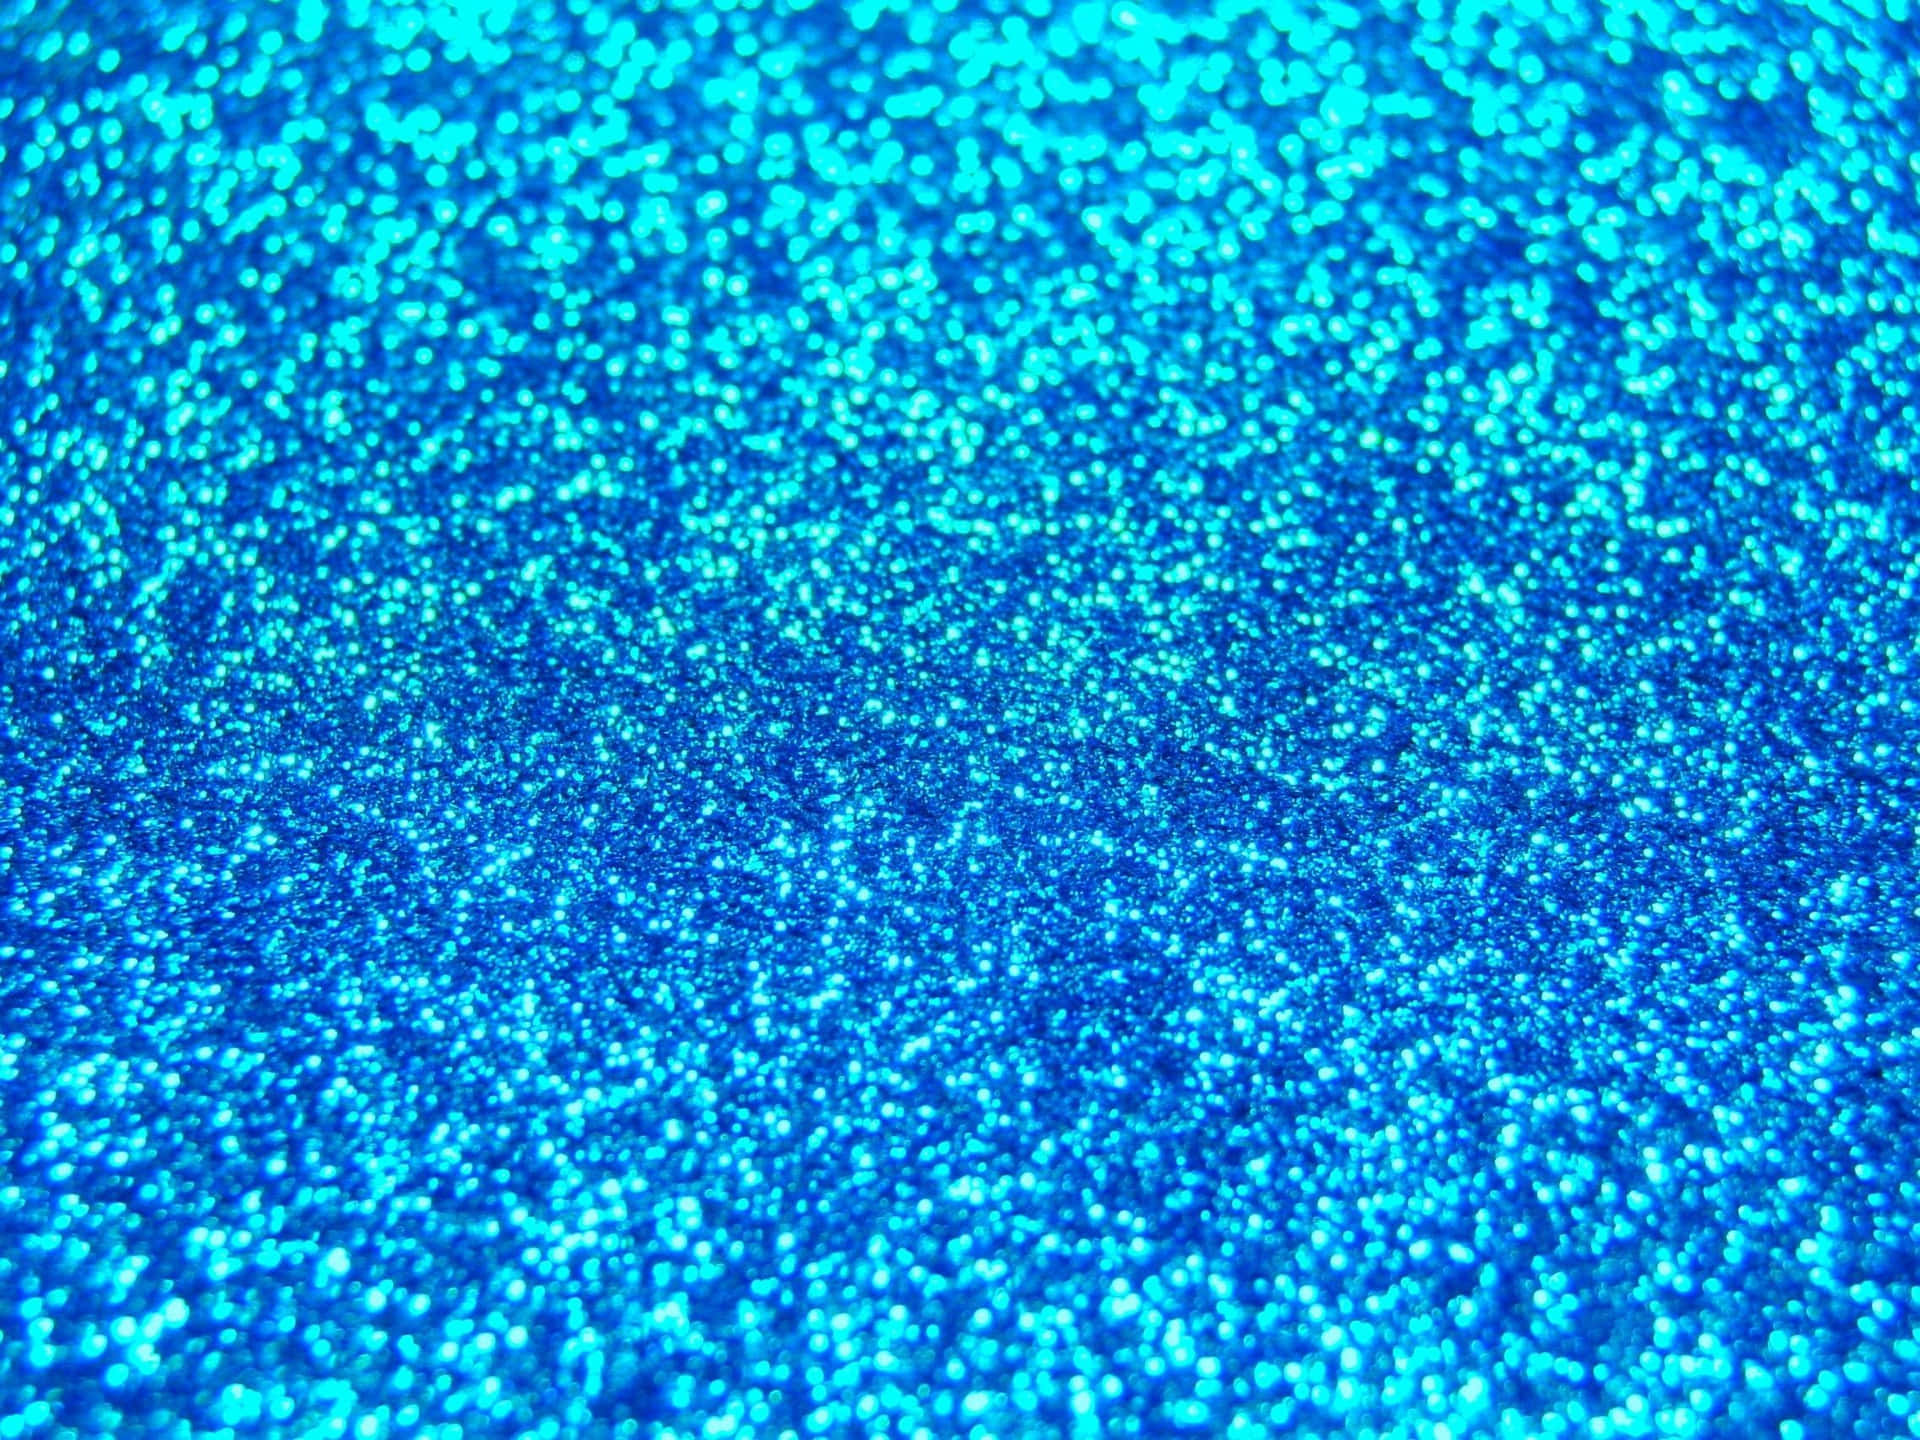 Make your room sparkle with this bright blue glitter background